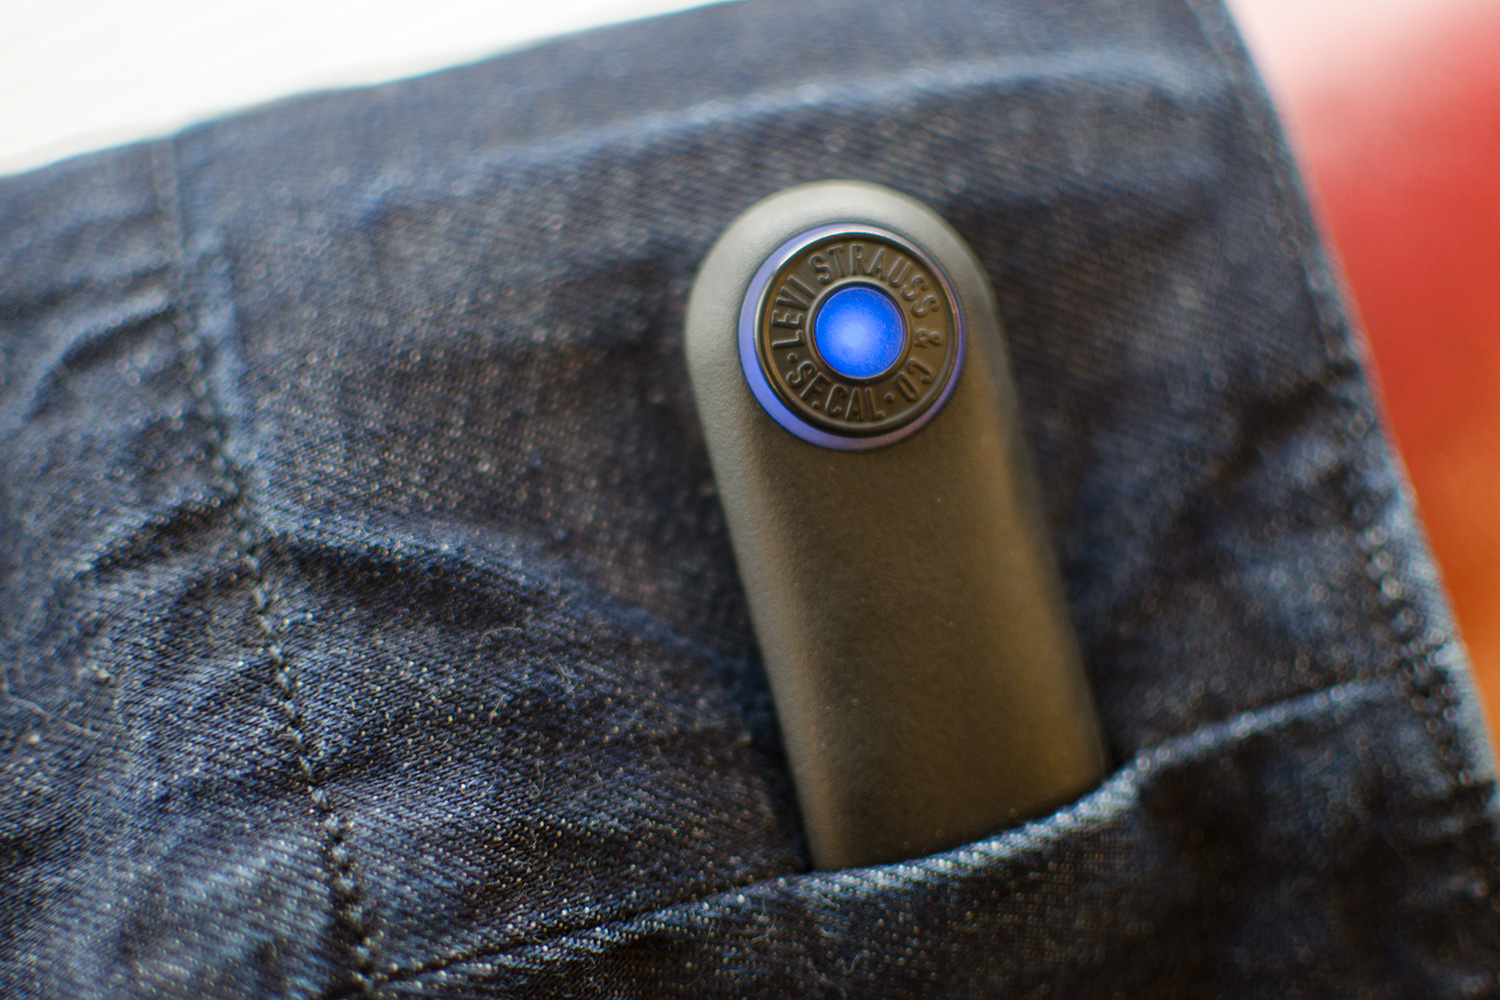 levis smart jacket changed how i use my phone levi jacquard google remote in sleeve